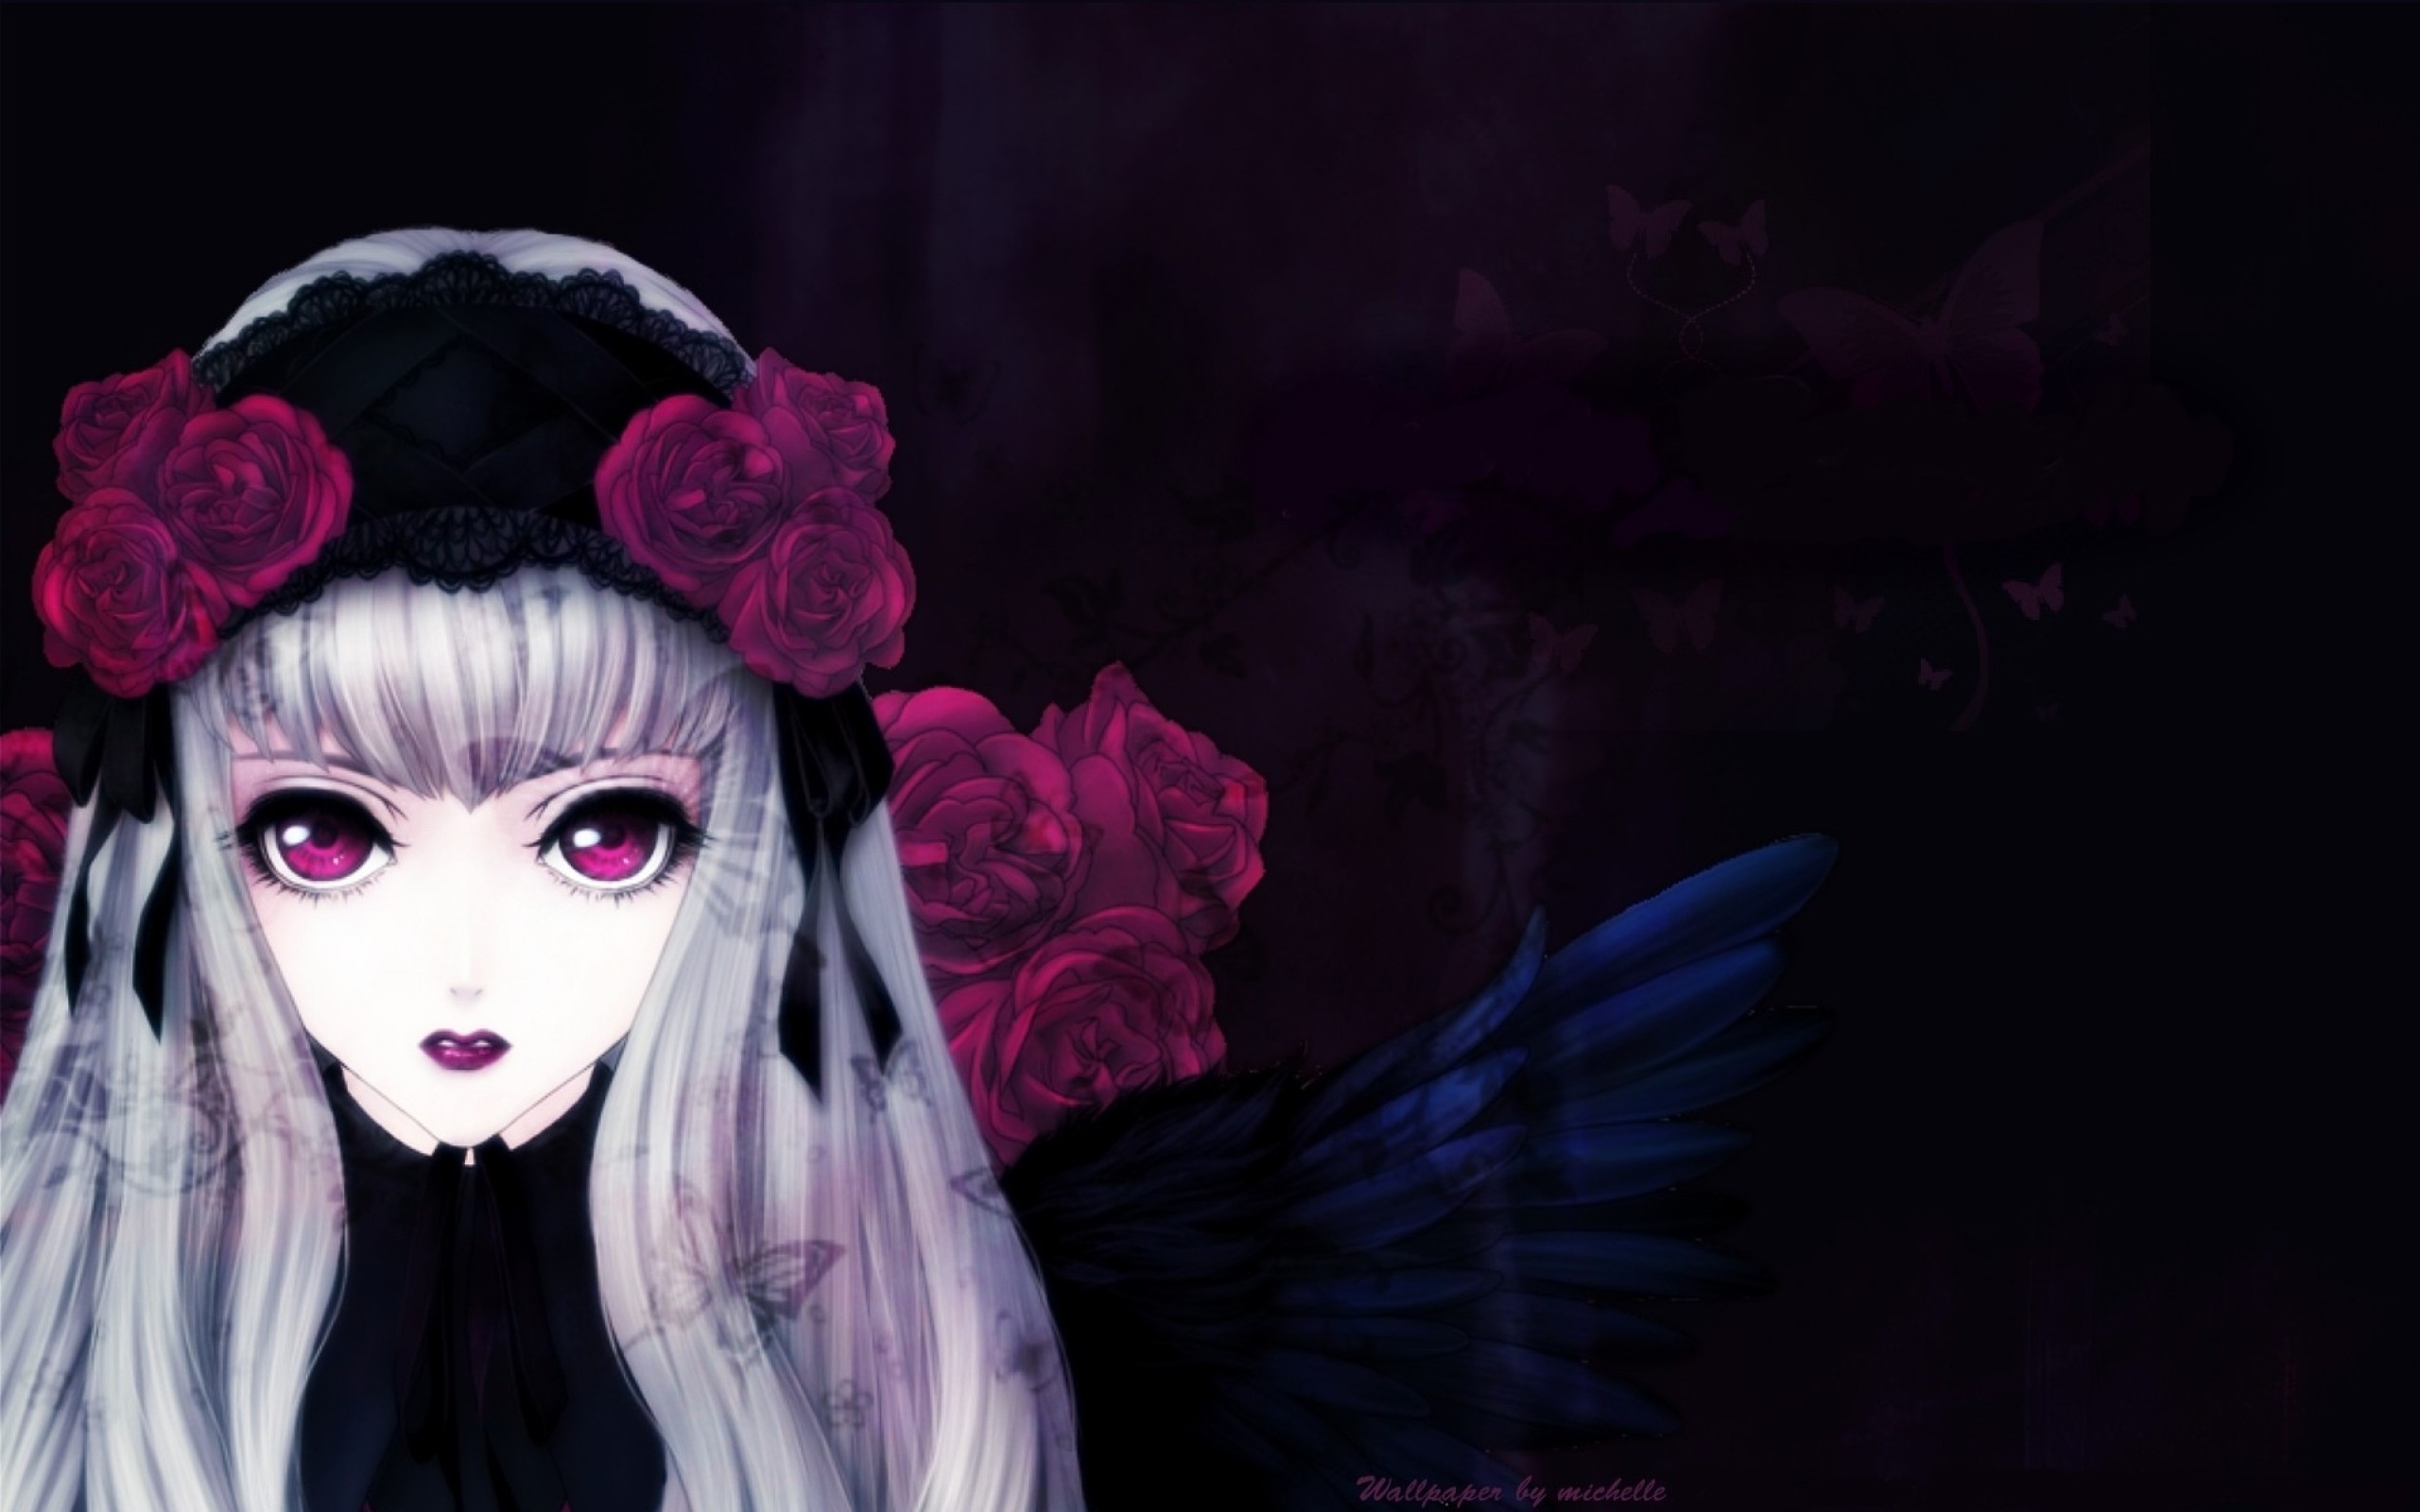 2560x1600 HD Gothic Anime Wallpapers - Page 2 of 3 - wallpaper.wiki ...